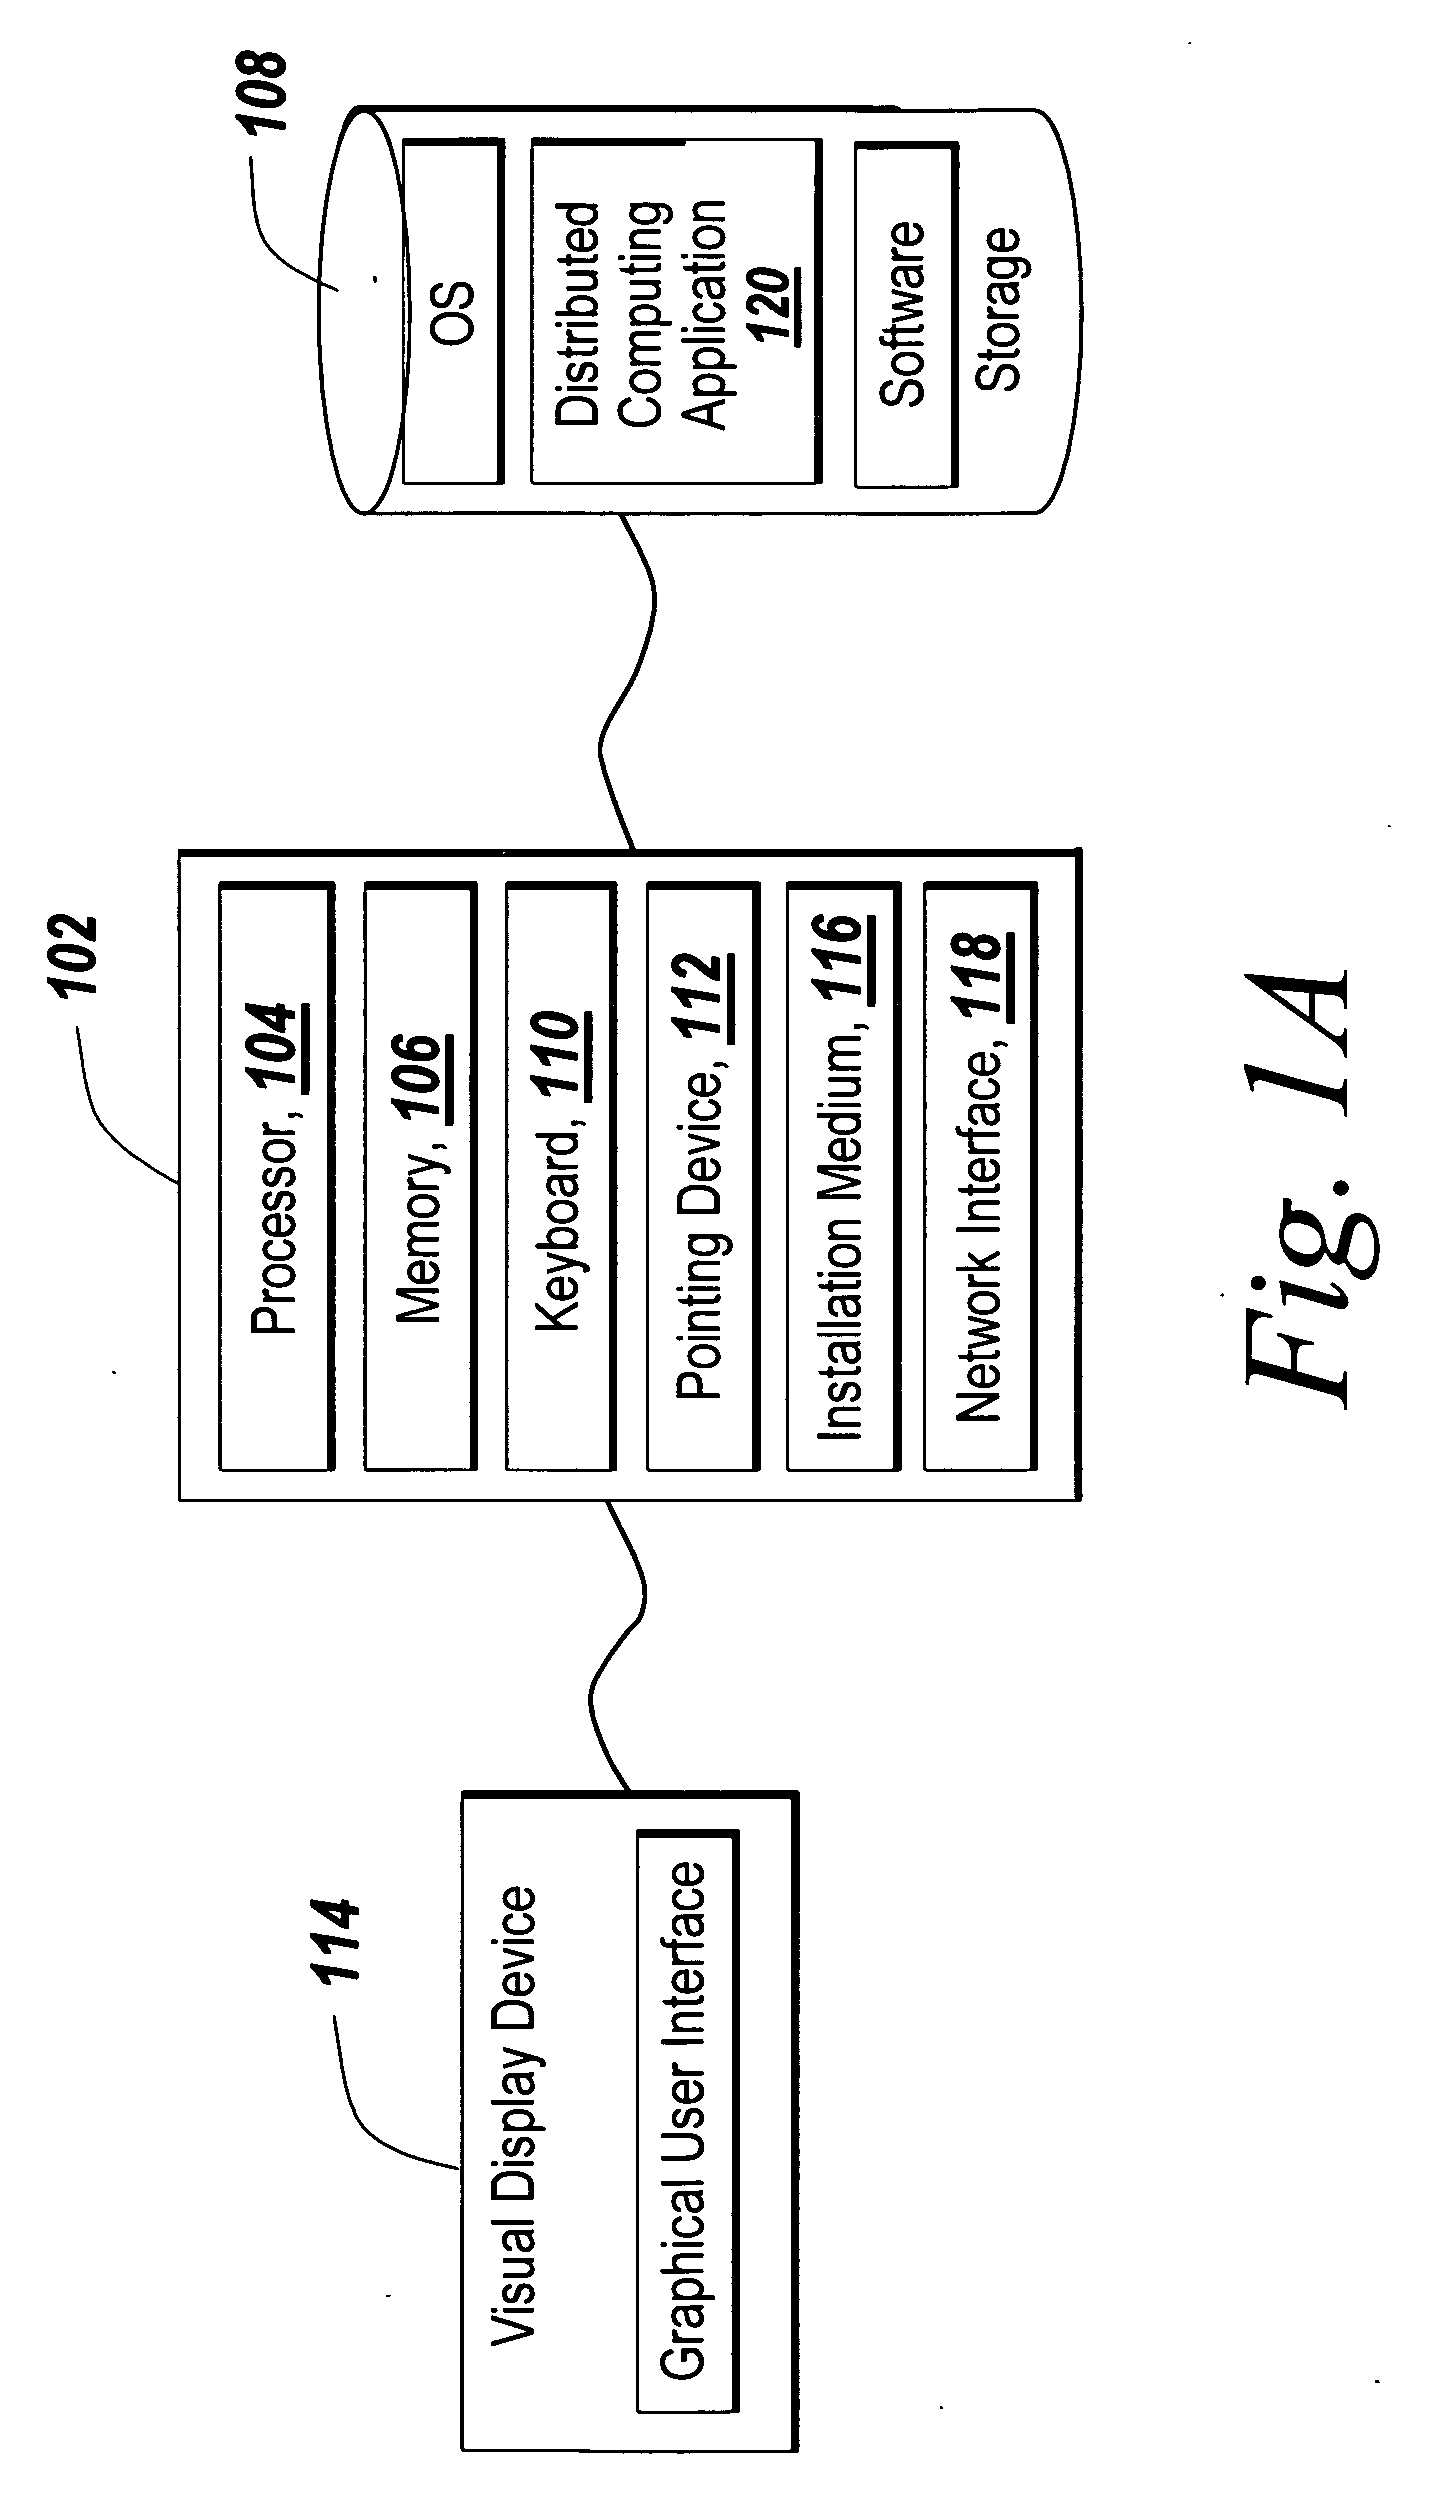 Instrument-based distributed computing systems